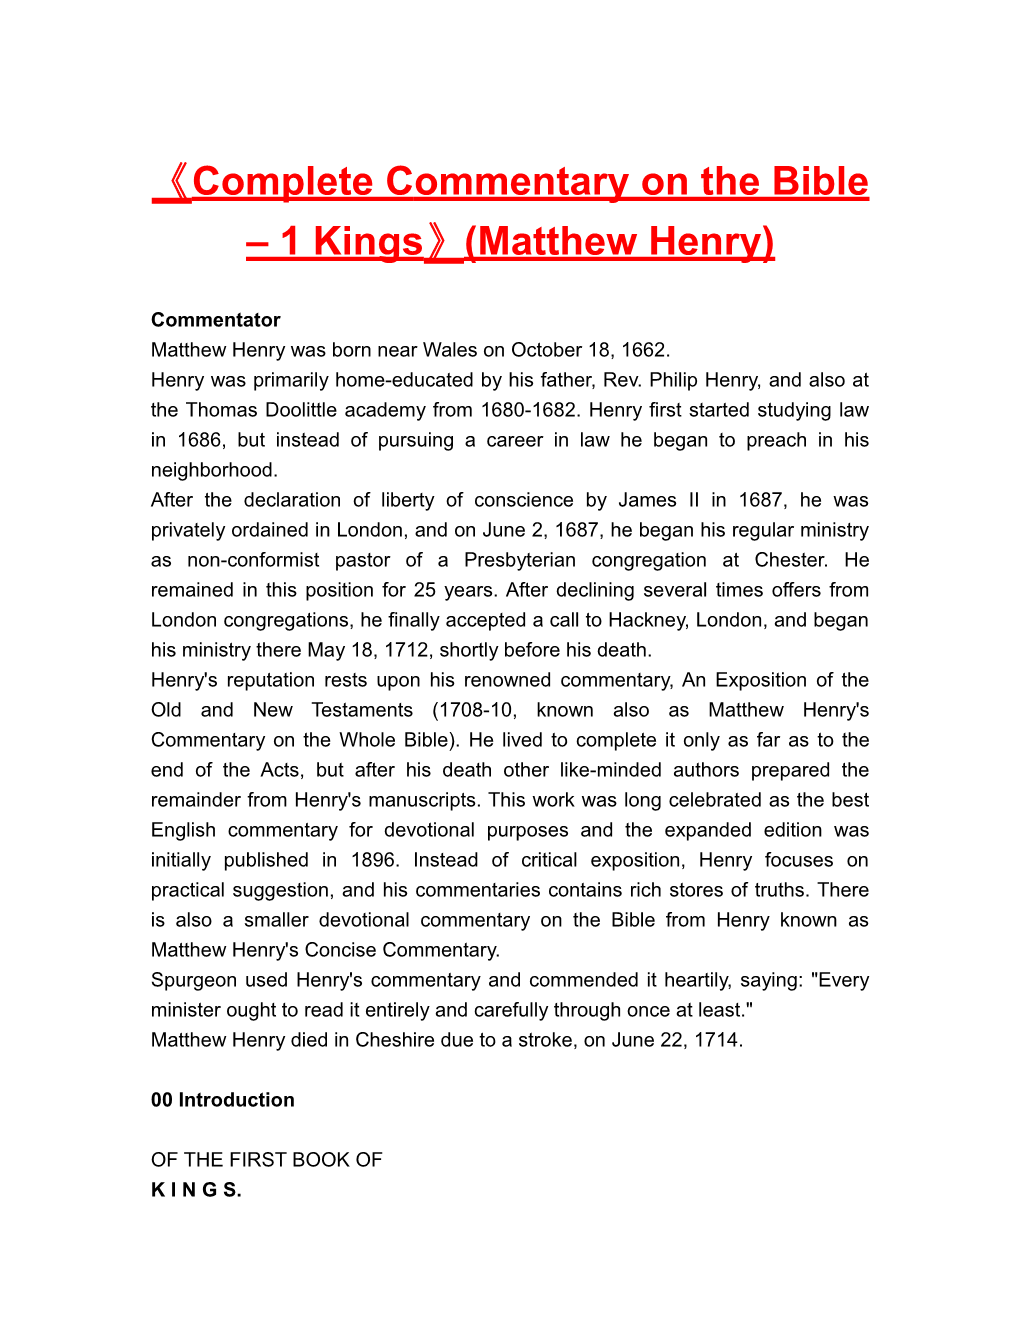 Completecommentary on the Bible 1 Kings (Matthew Henry)